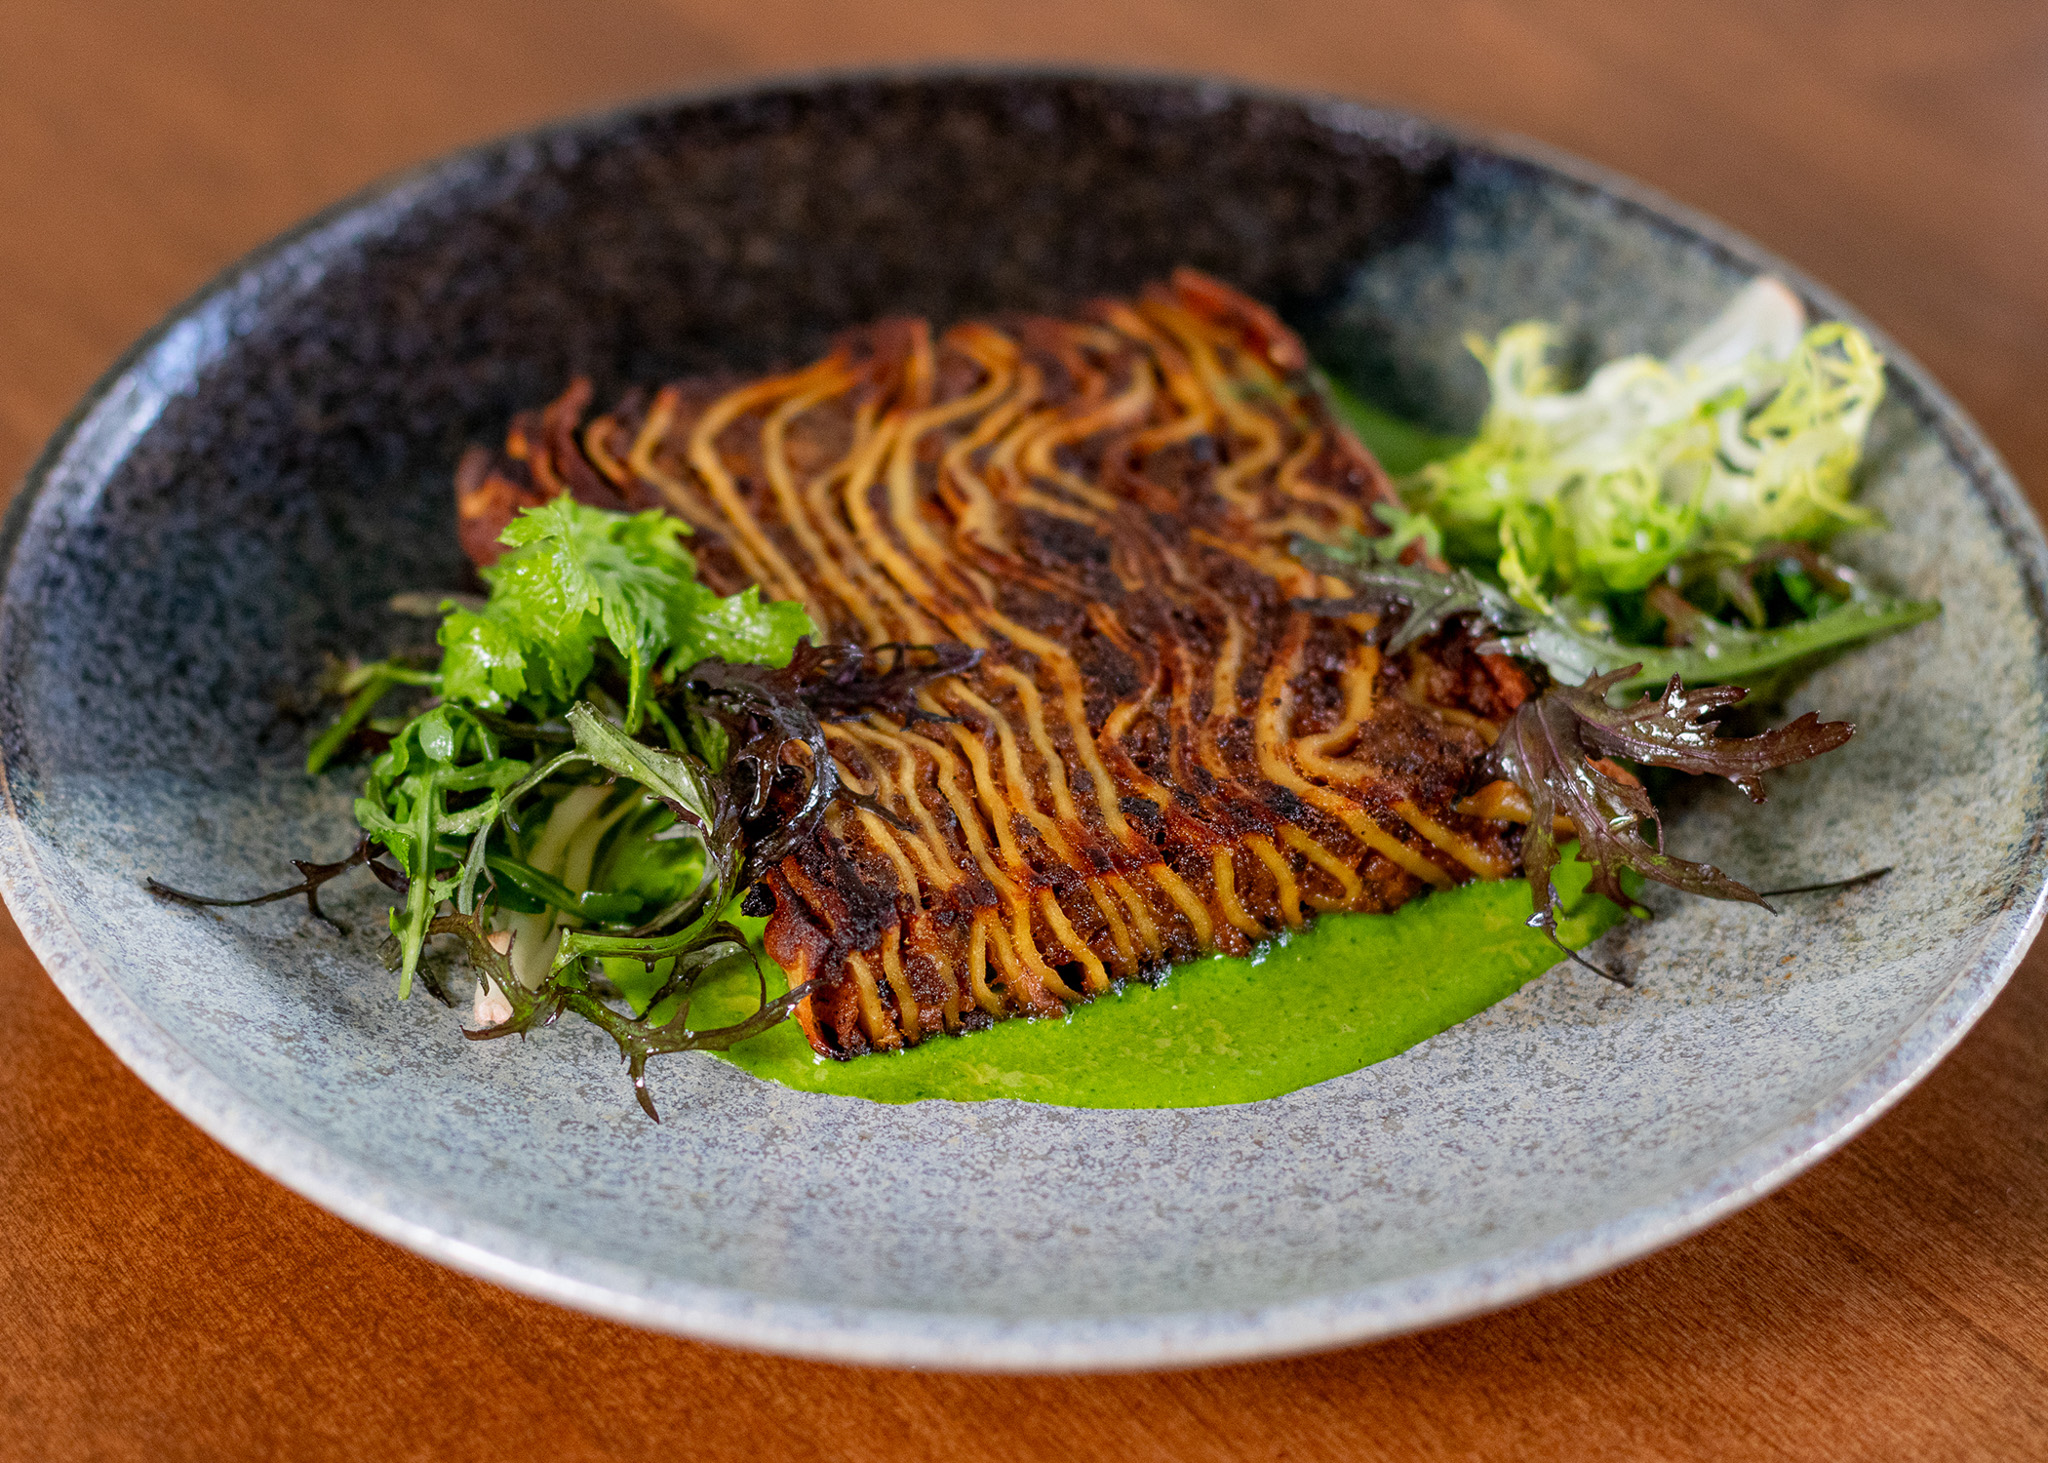 Grilled fish with charred top on a bed of green sauce, garnished with leafy greens, served on a speckled blue plate.